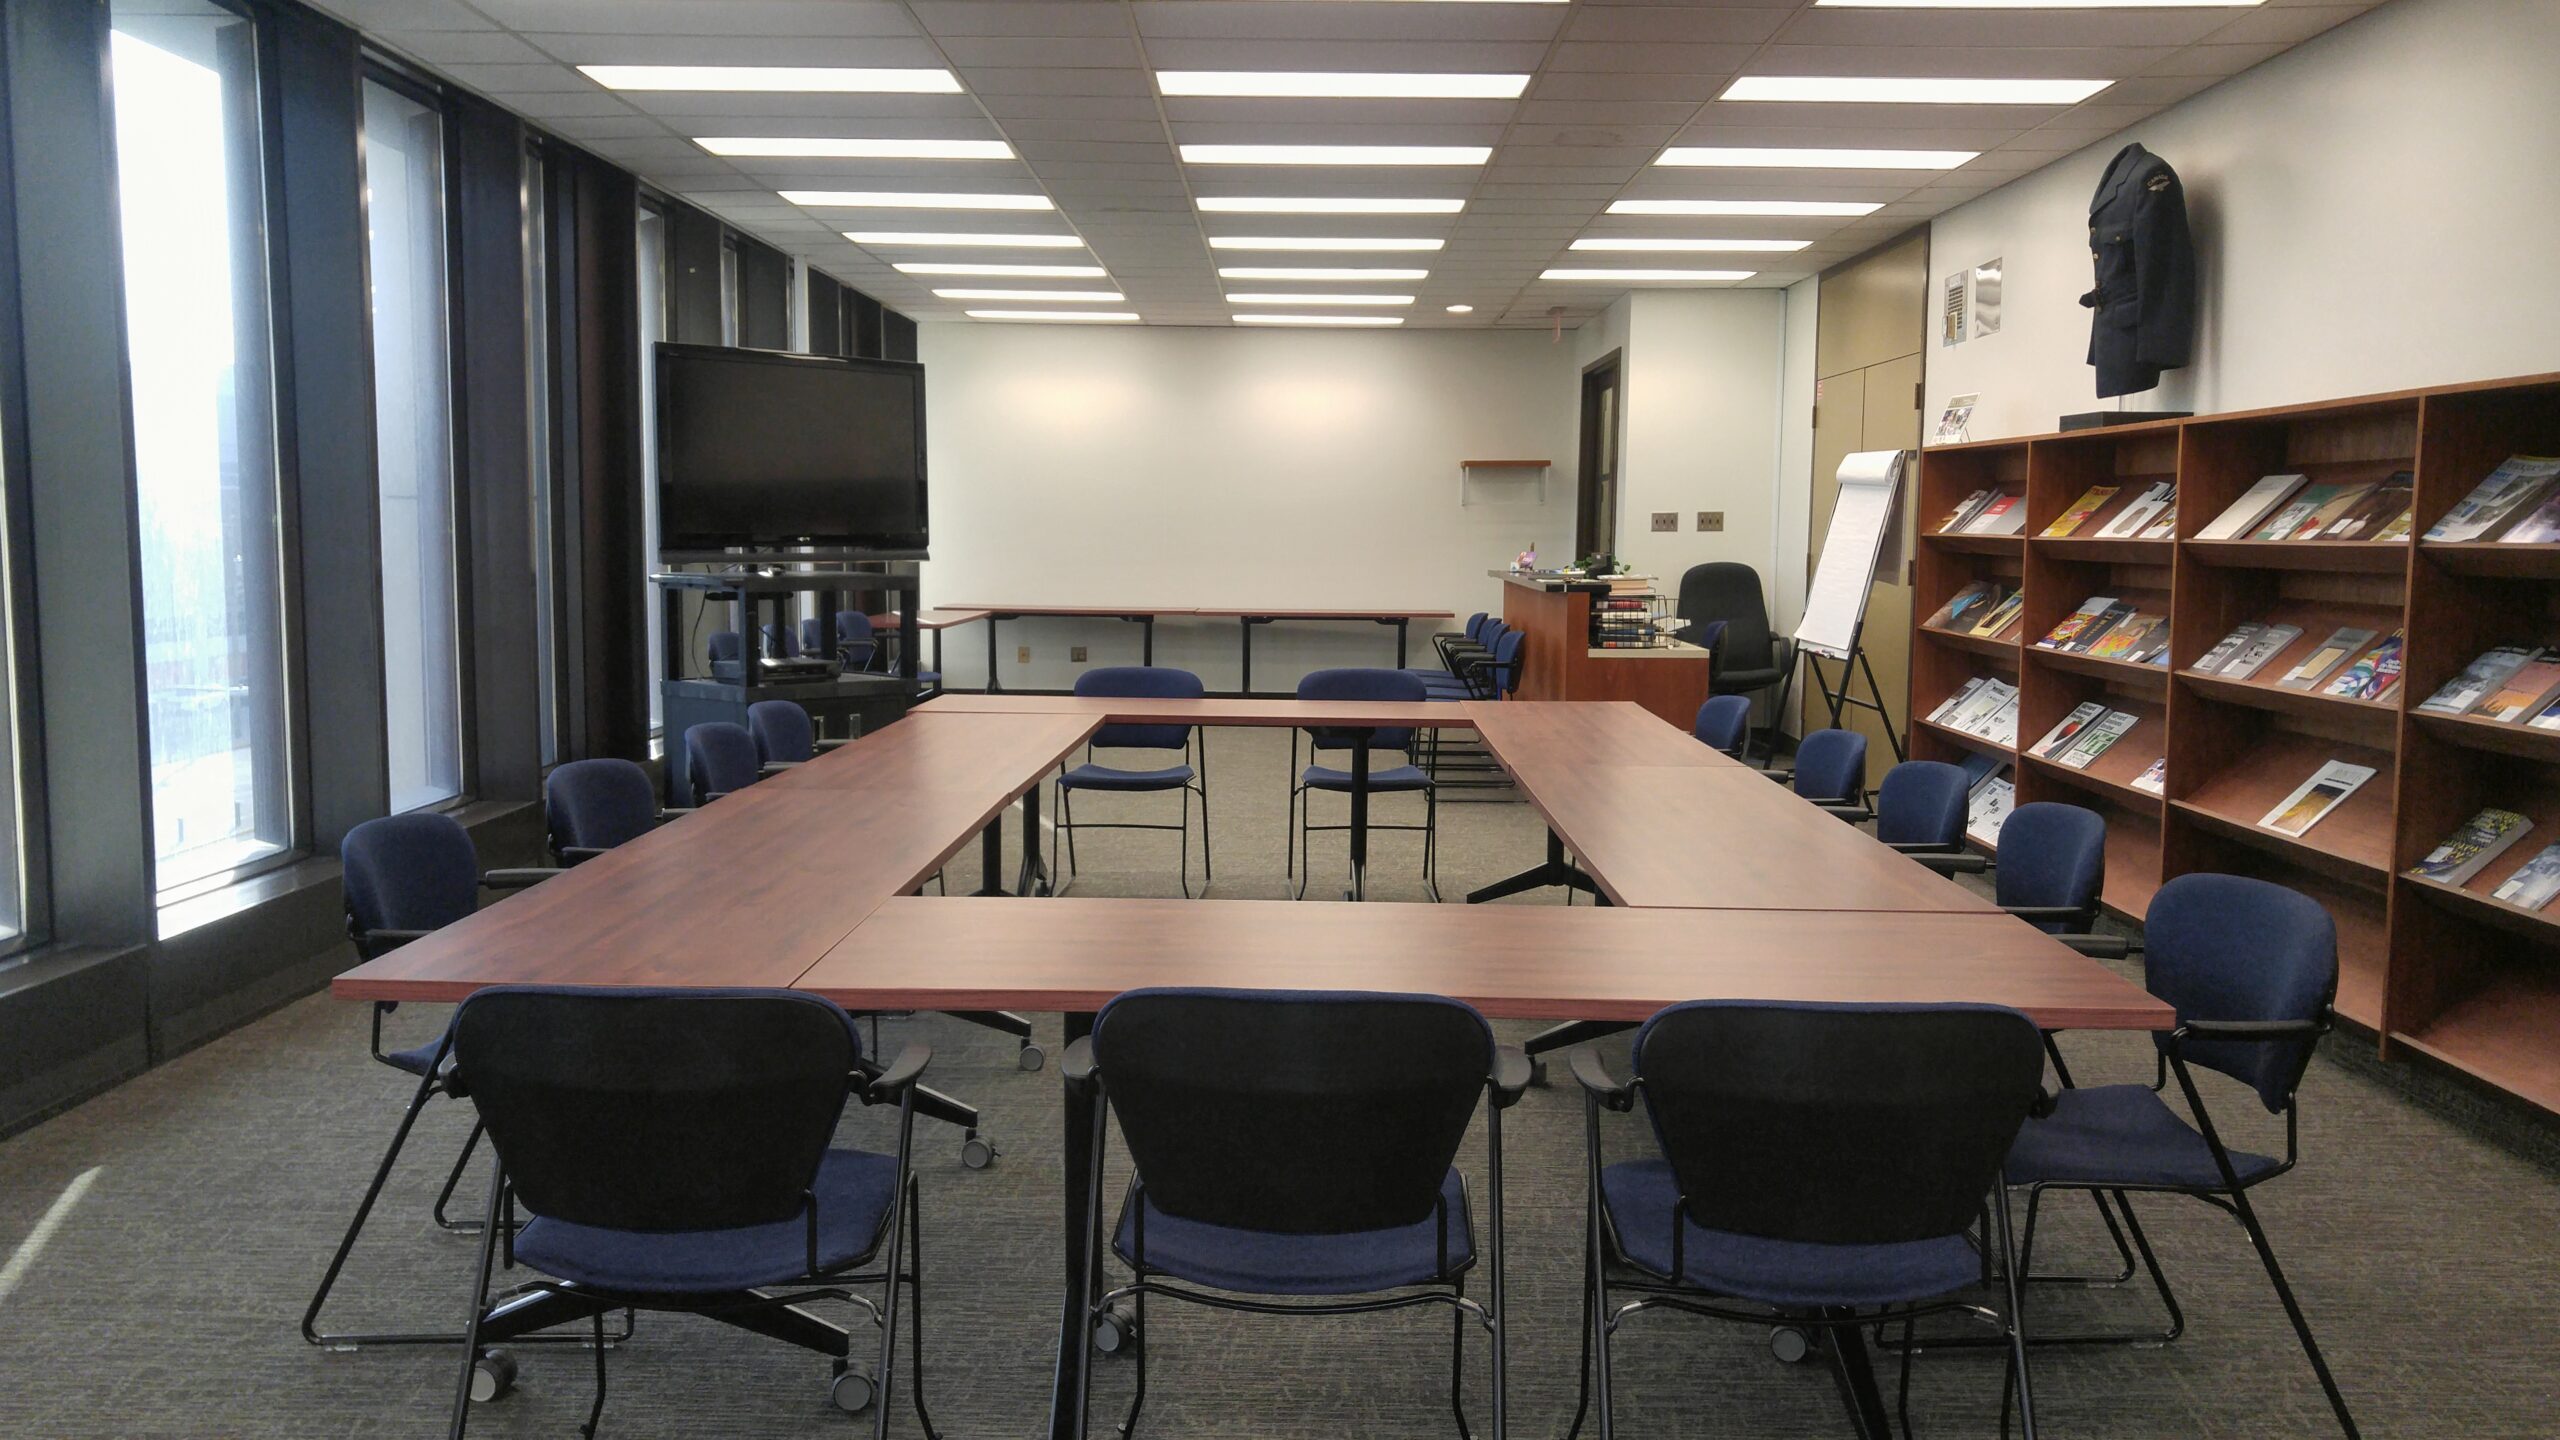 An office boardroom with tables lined up together in a rectangle in the centre of the room. On the left side are floor-to-ceiling windows and a large flat-screen television on a rolling cart. To the right are book rack-style shelves.